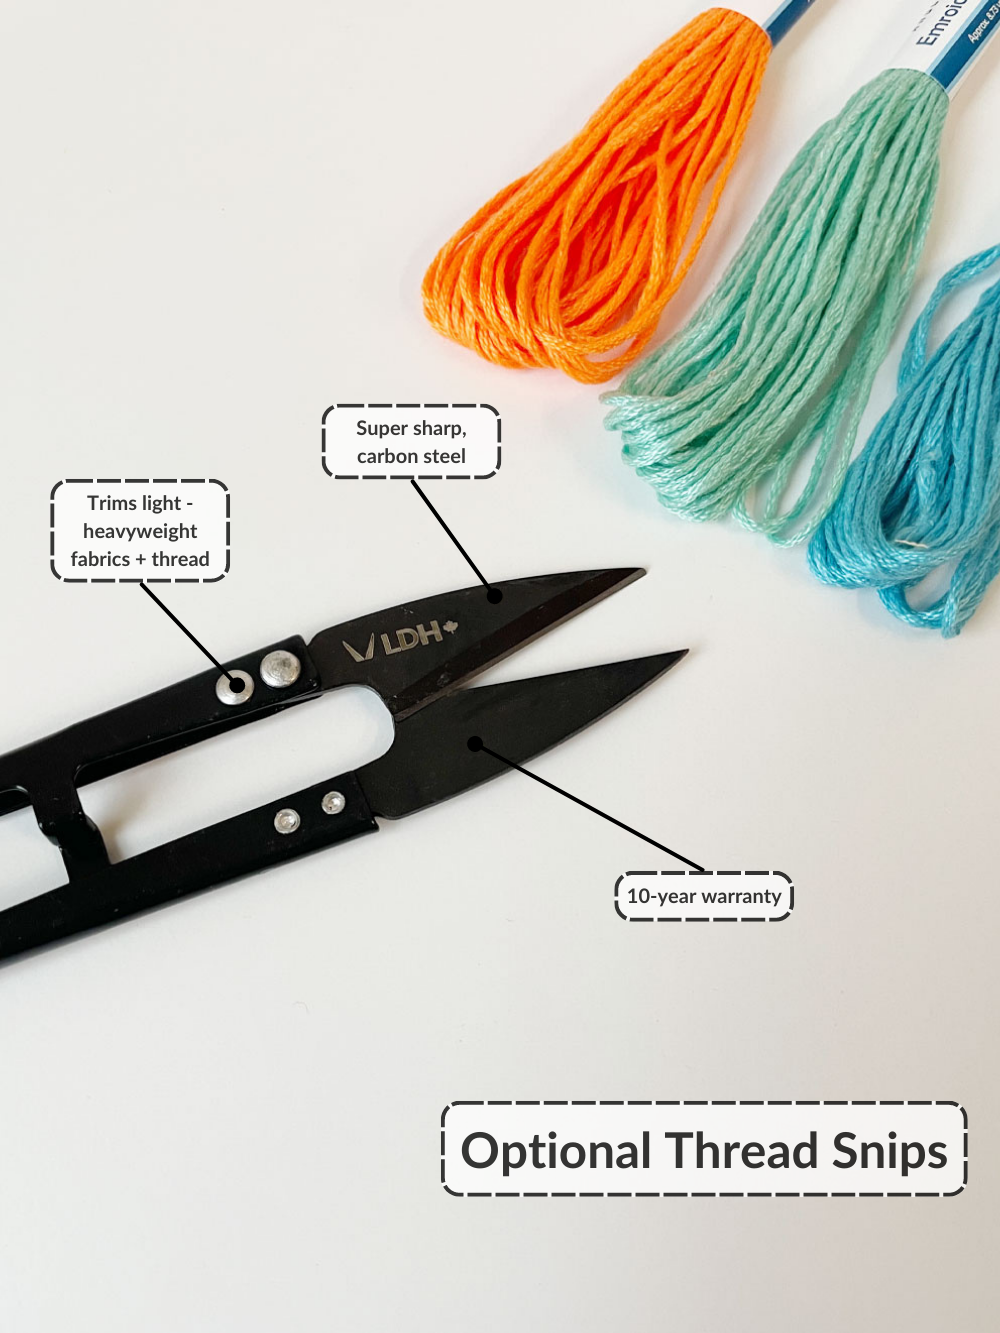 Optional thread snips are super sharp, carbon steel with 10 year warranty. Trims light-heavyweight fabrics and thread. Black handle with dark grey steel snips shown next to orange, green, and blue embroidery floss. 